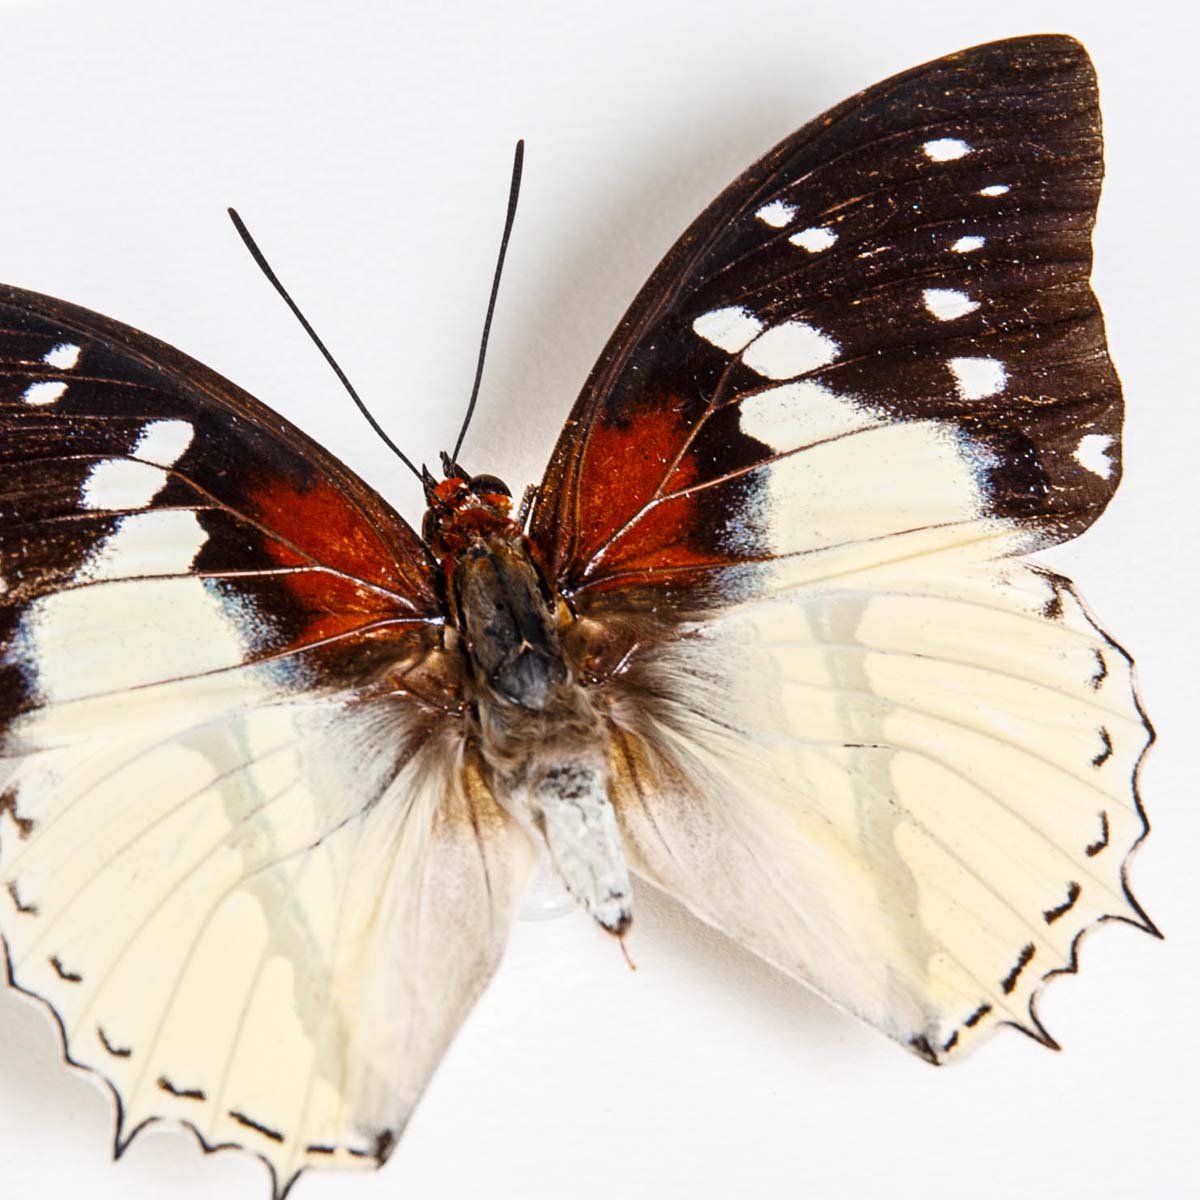 Hadrian's White Charaxes Butterfly In Box Frame (Charaxes hadrianus)